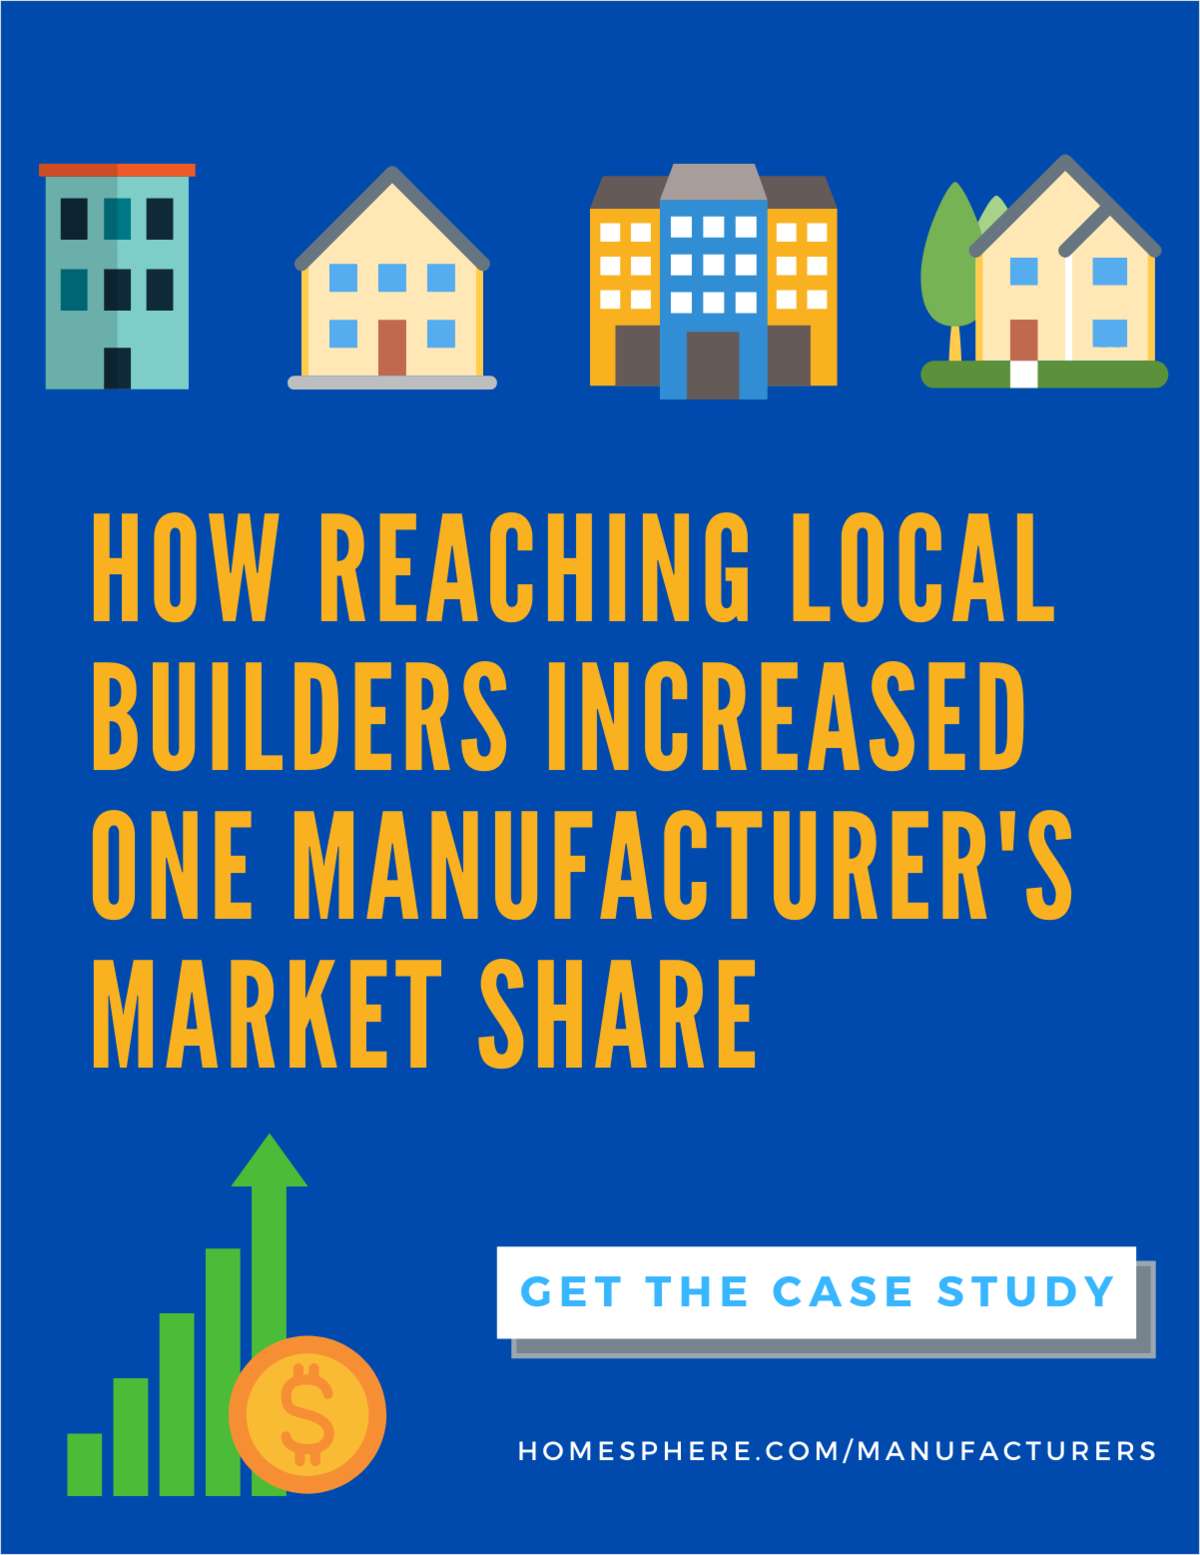 How Reaching Local Builders Increased One Manufacturer's Market Share